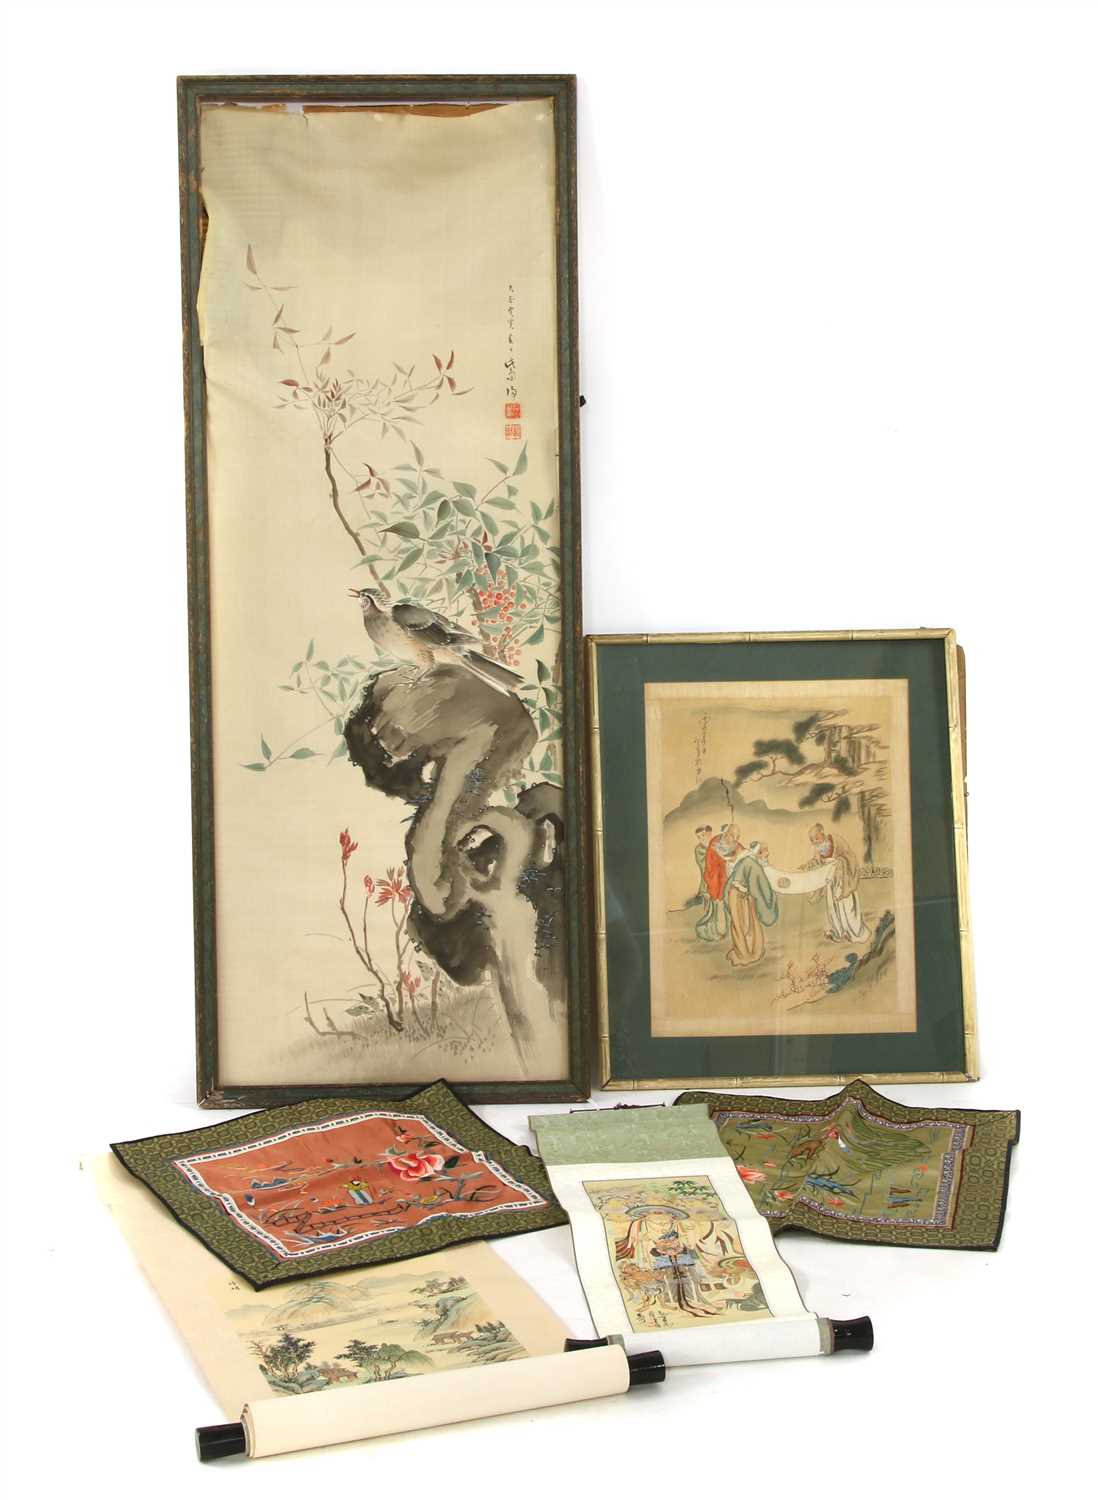 A collection of Chinese embroideries